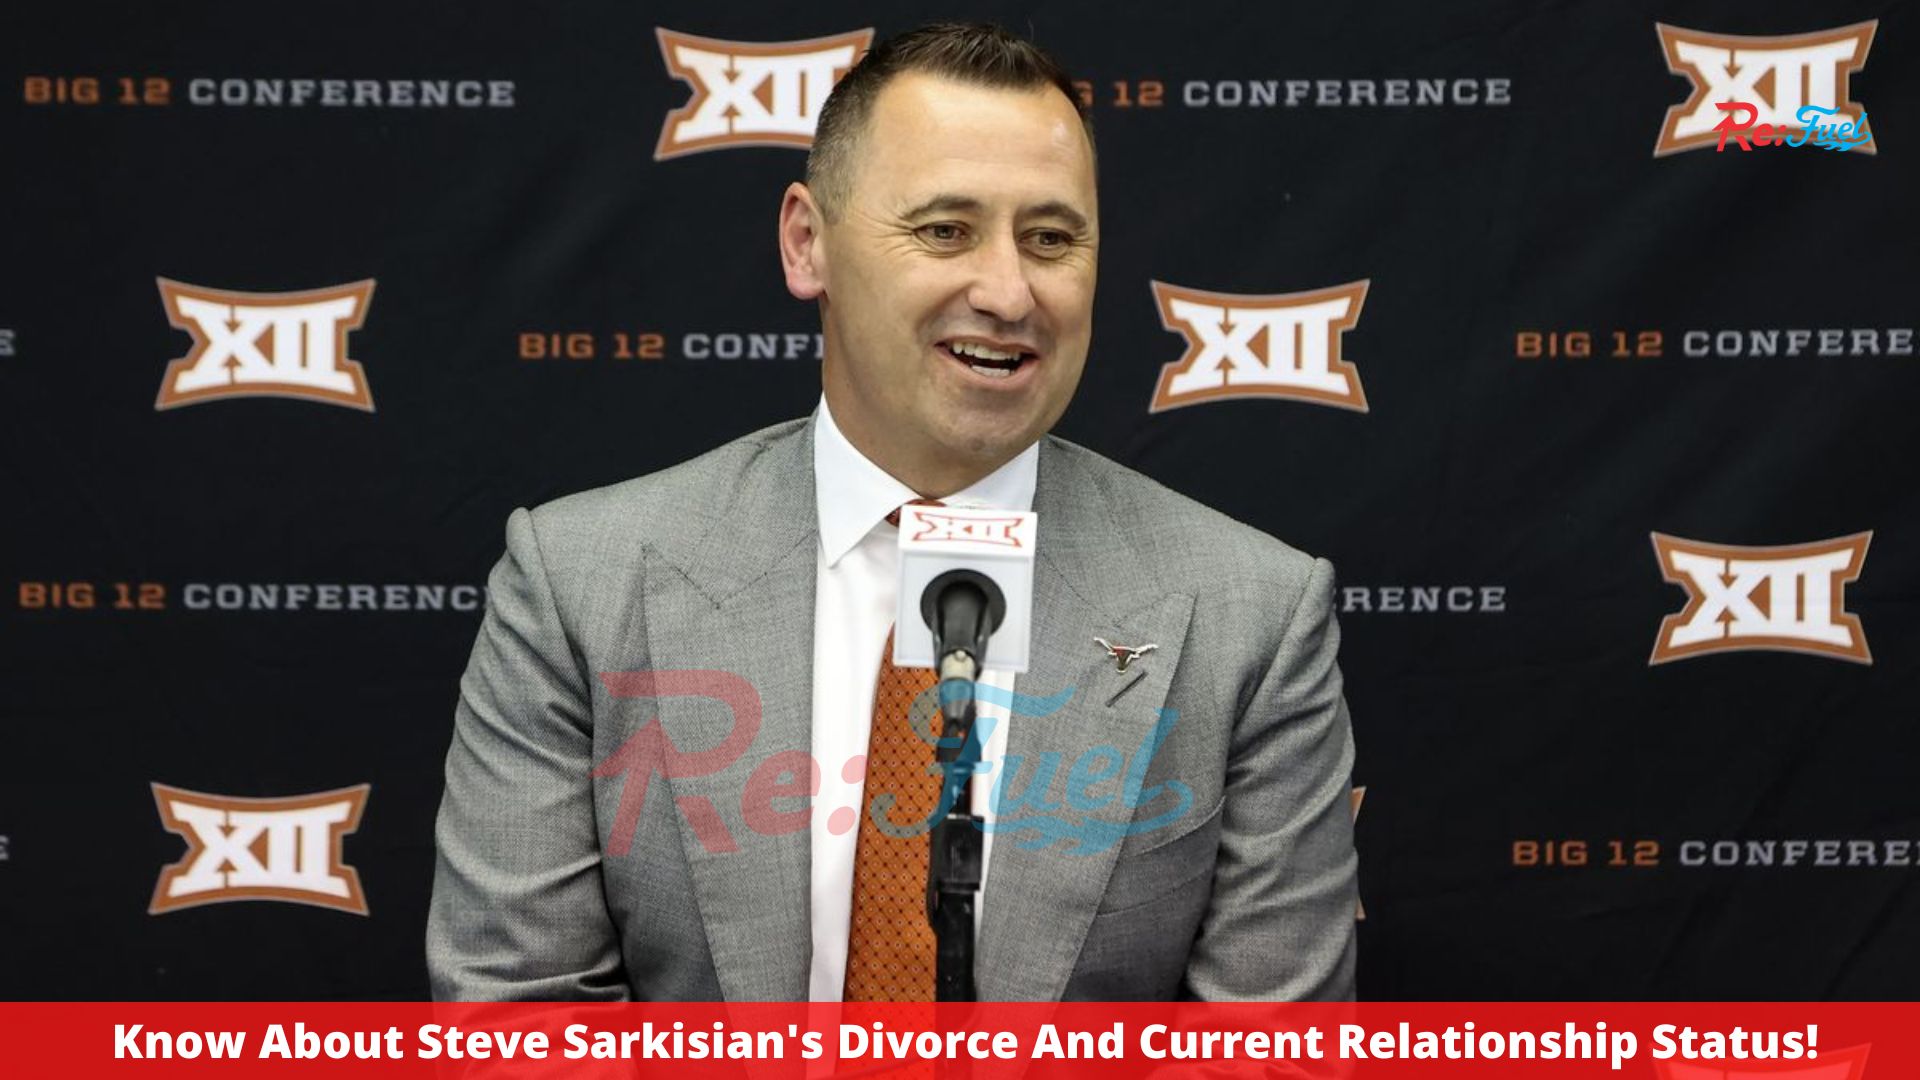 Know About Steve Sarkisian's Divorce And Current Relationship Status!